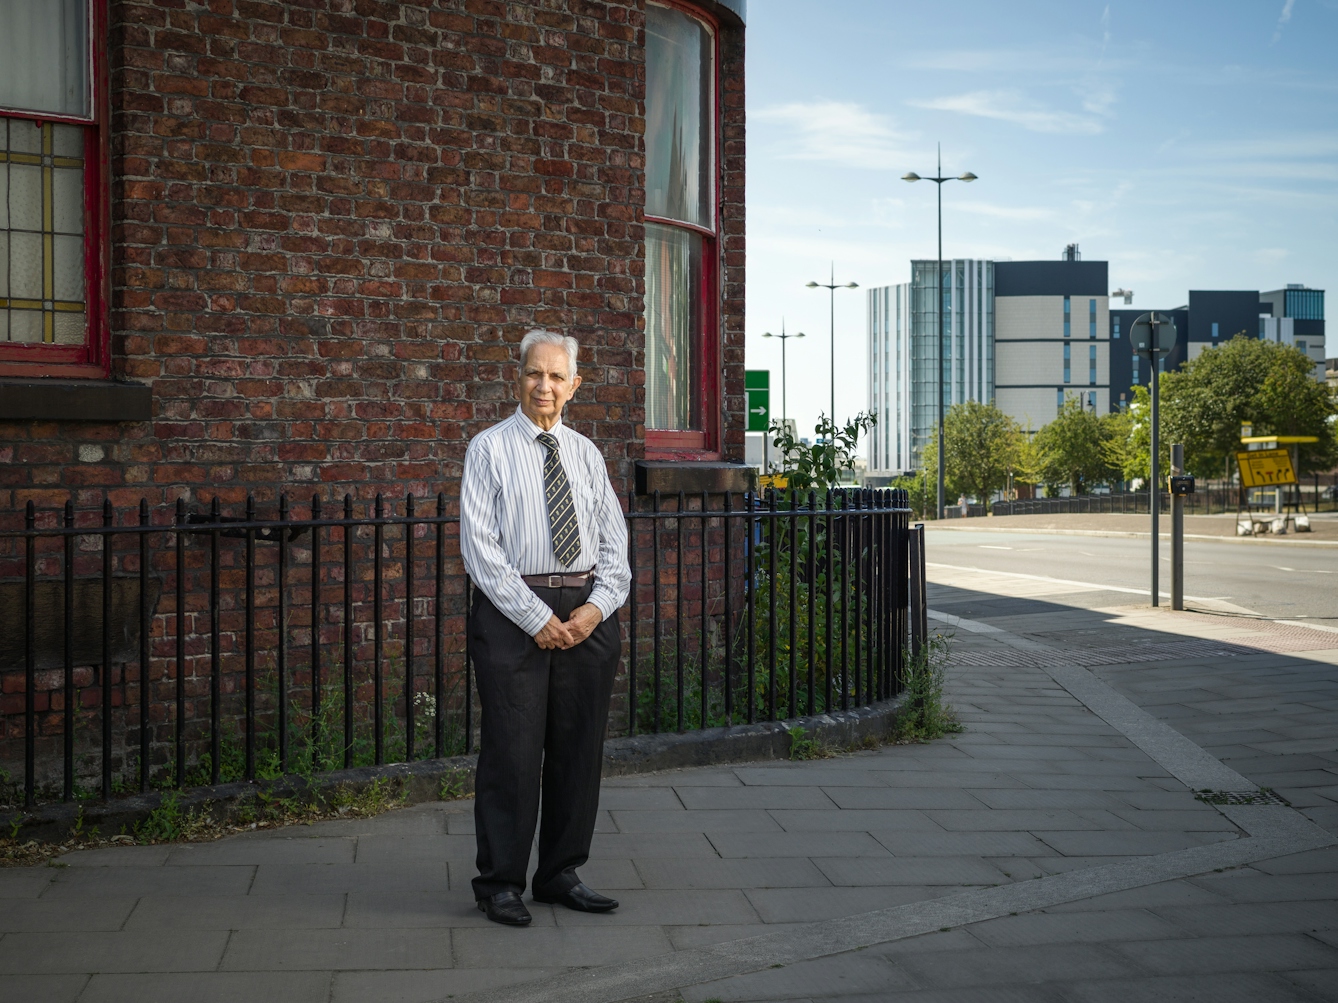 Photographic full length portrait of Dr Shiv Pande, a retires general practitioner, outside his former surgery in Liverpool.